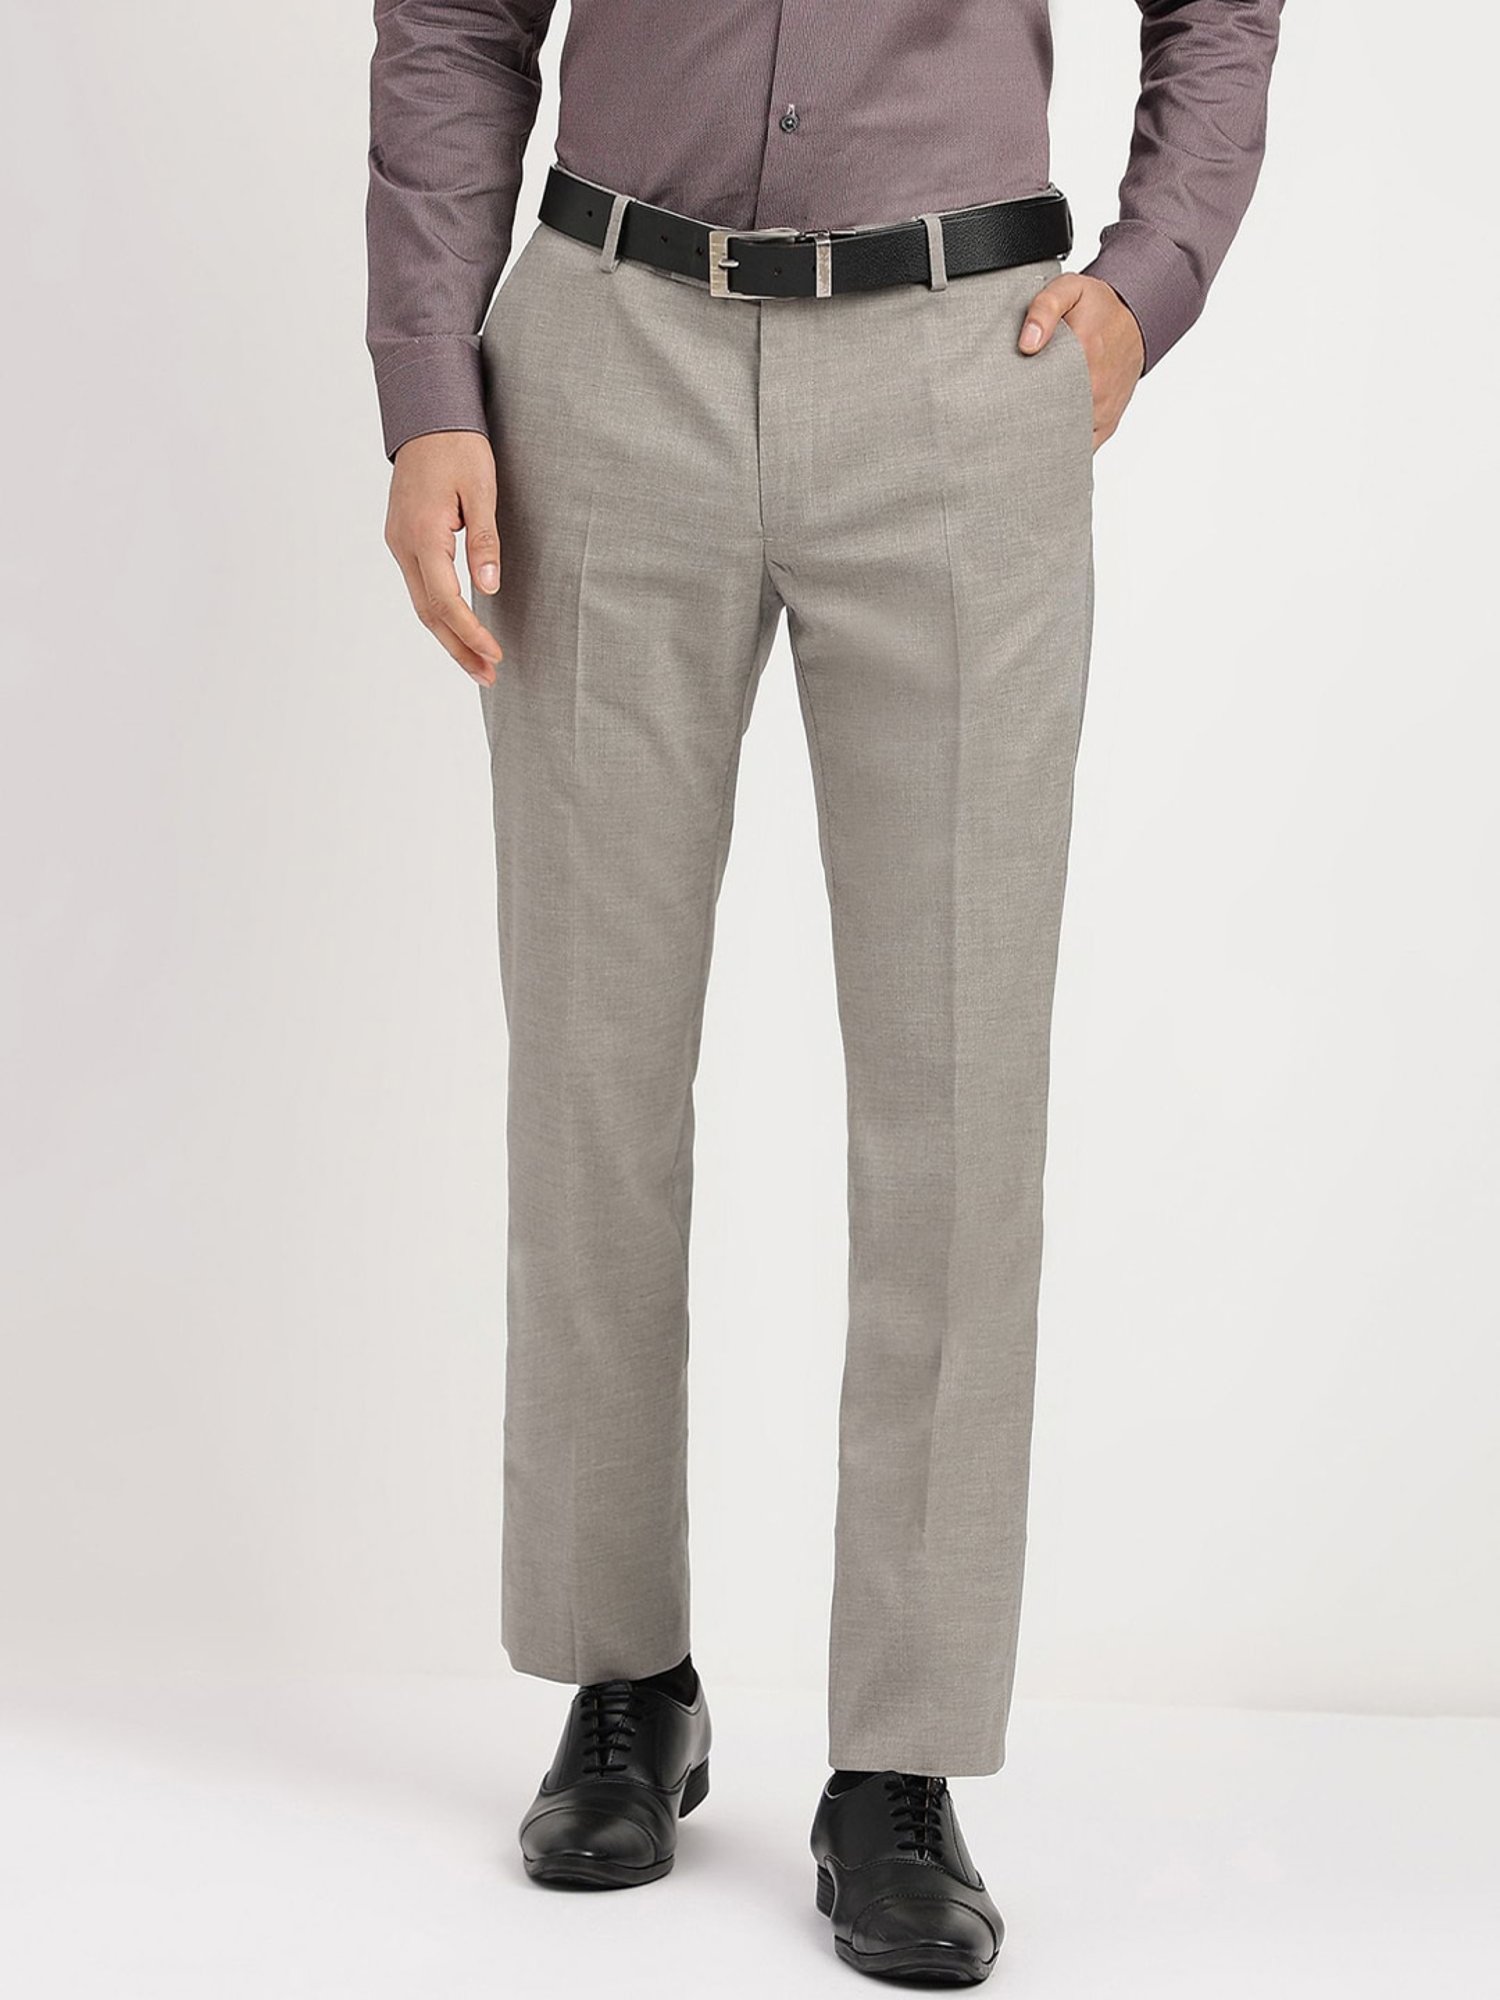 Arrow Regular Fit Formal Mens Trouser Charcoal Grey VGW0ZNXNTPX in  Chennai at best price by Attitude  Justdial